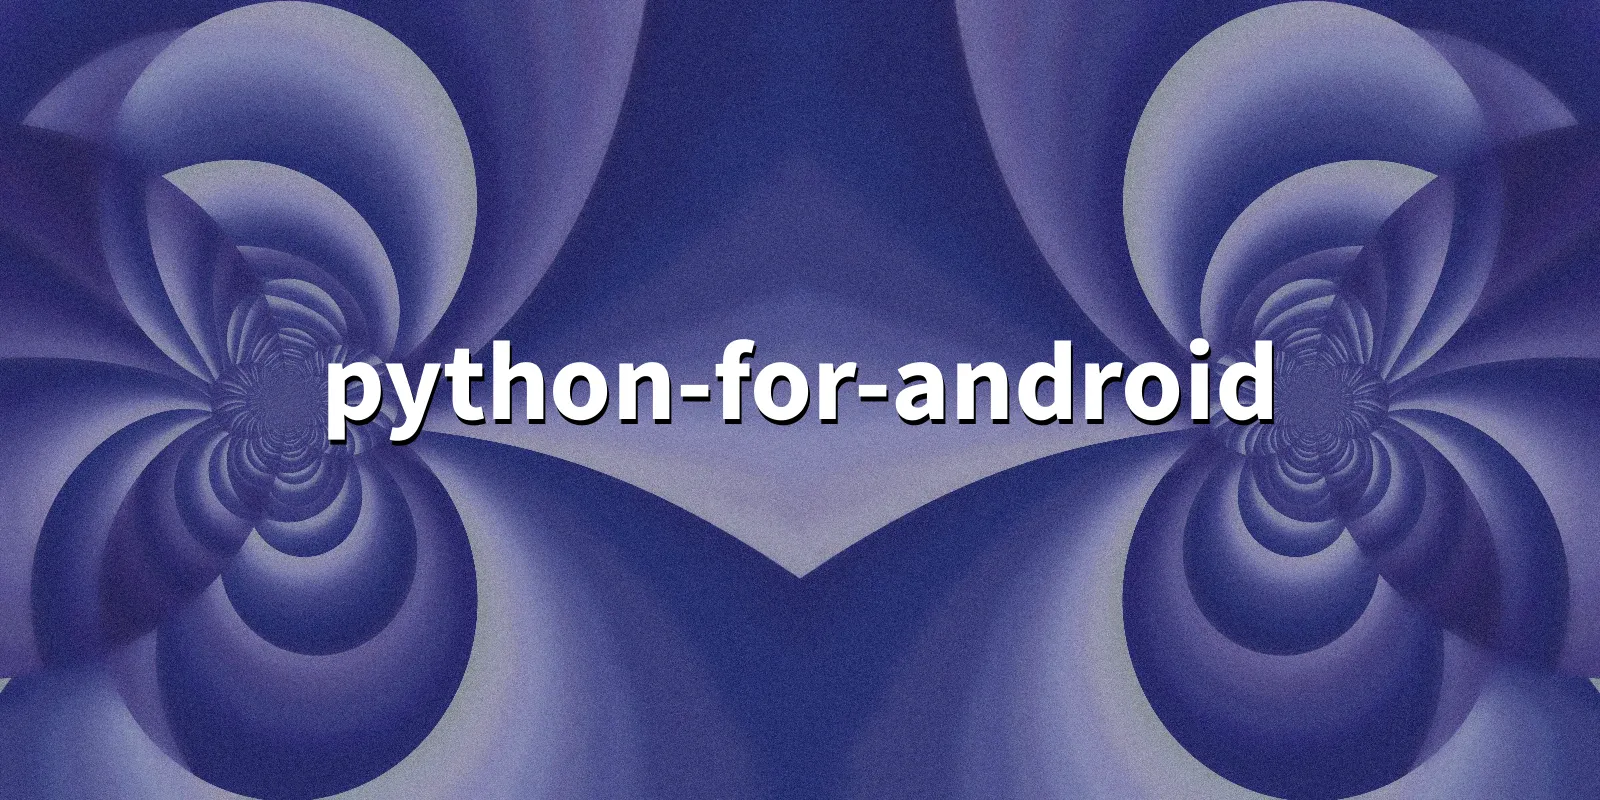 /pkg/p/python-for-android/python-for-android-banner.webp